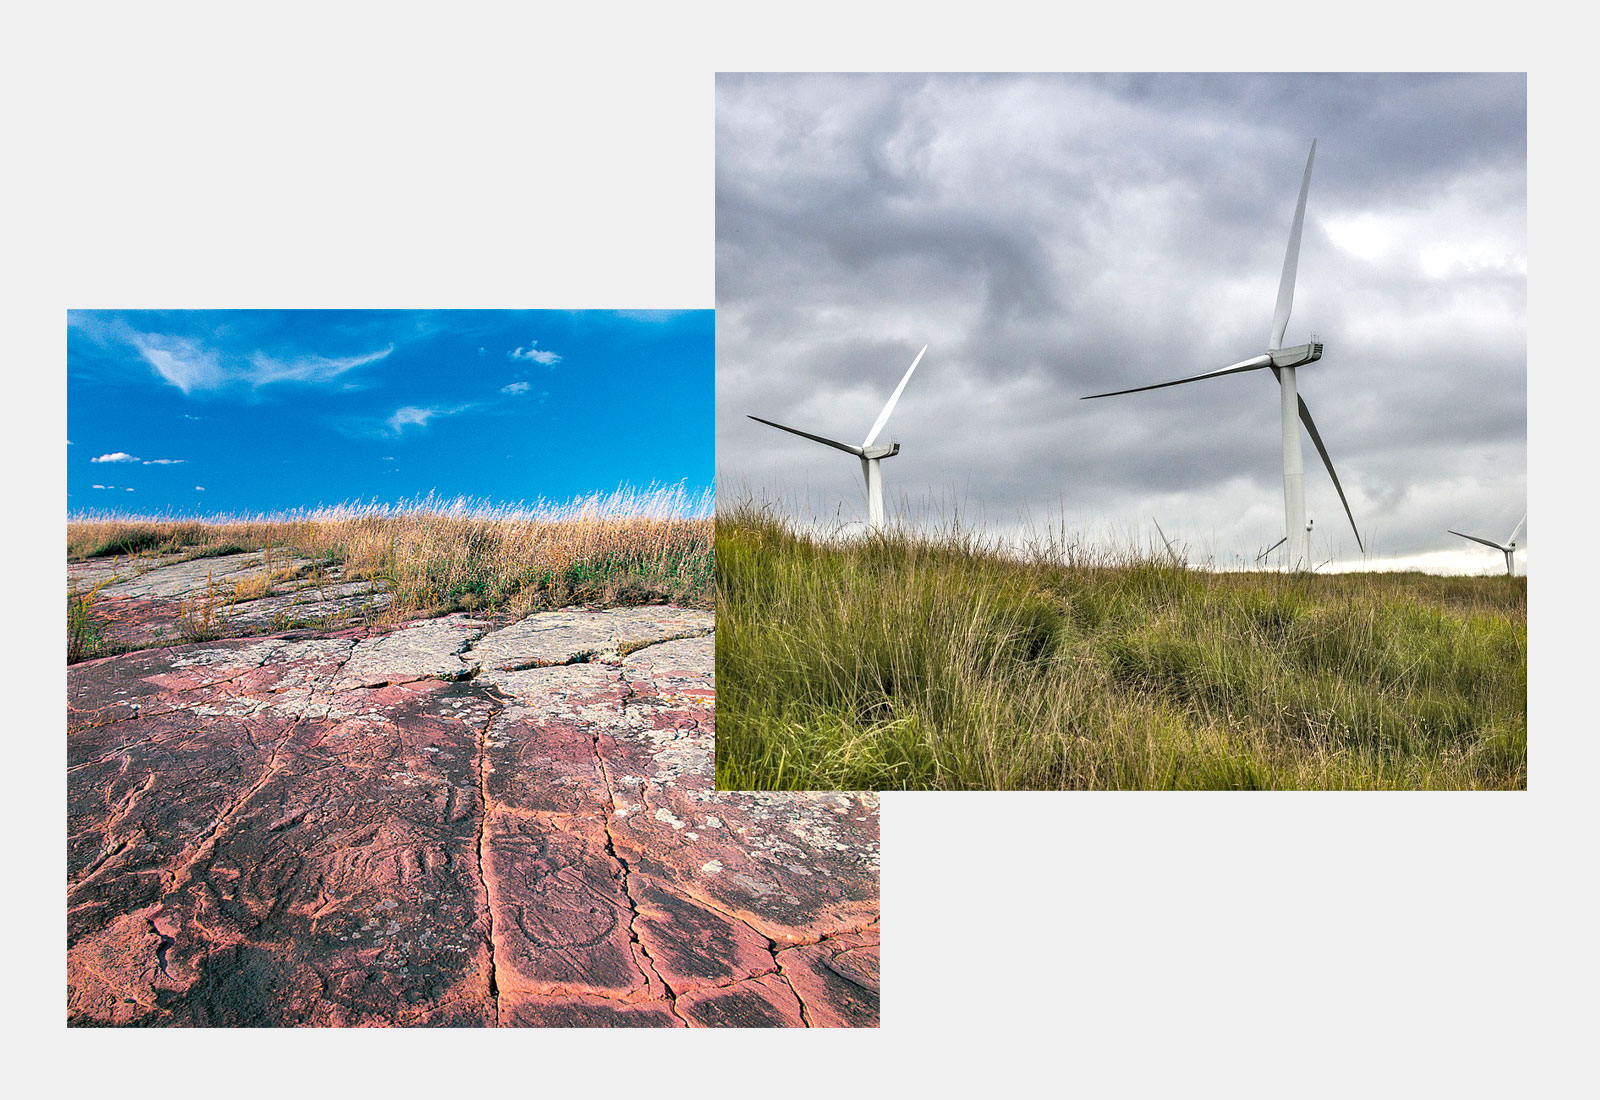 Side by side are two pictures, one of the petroglyphs and prairie and one of two wind turbines on a prairie.